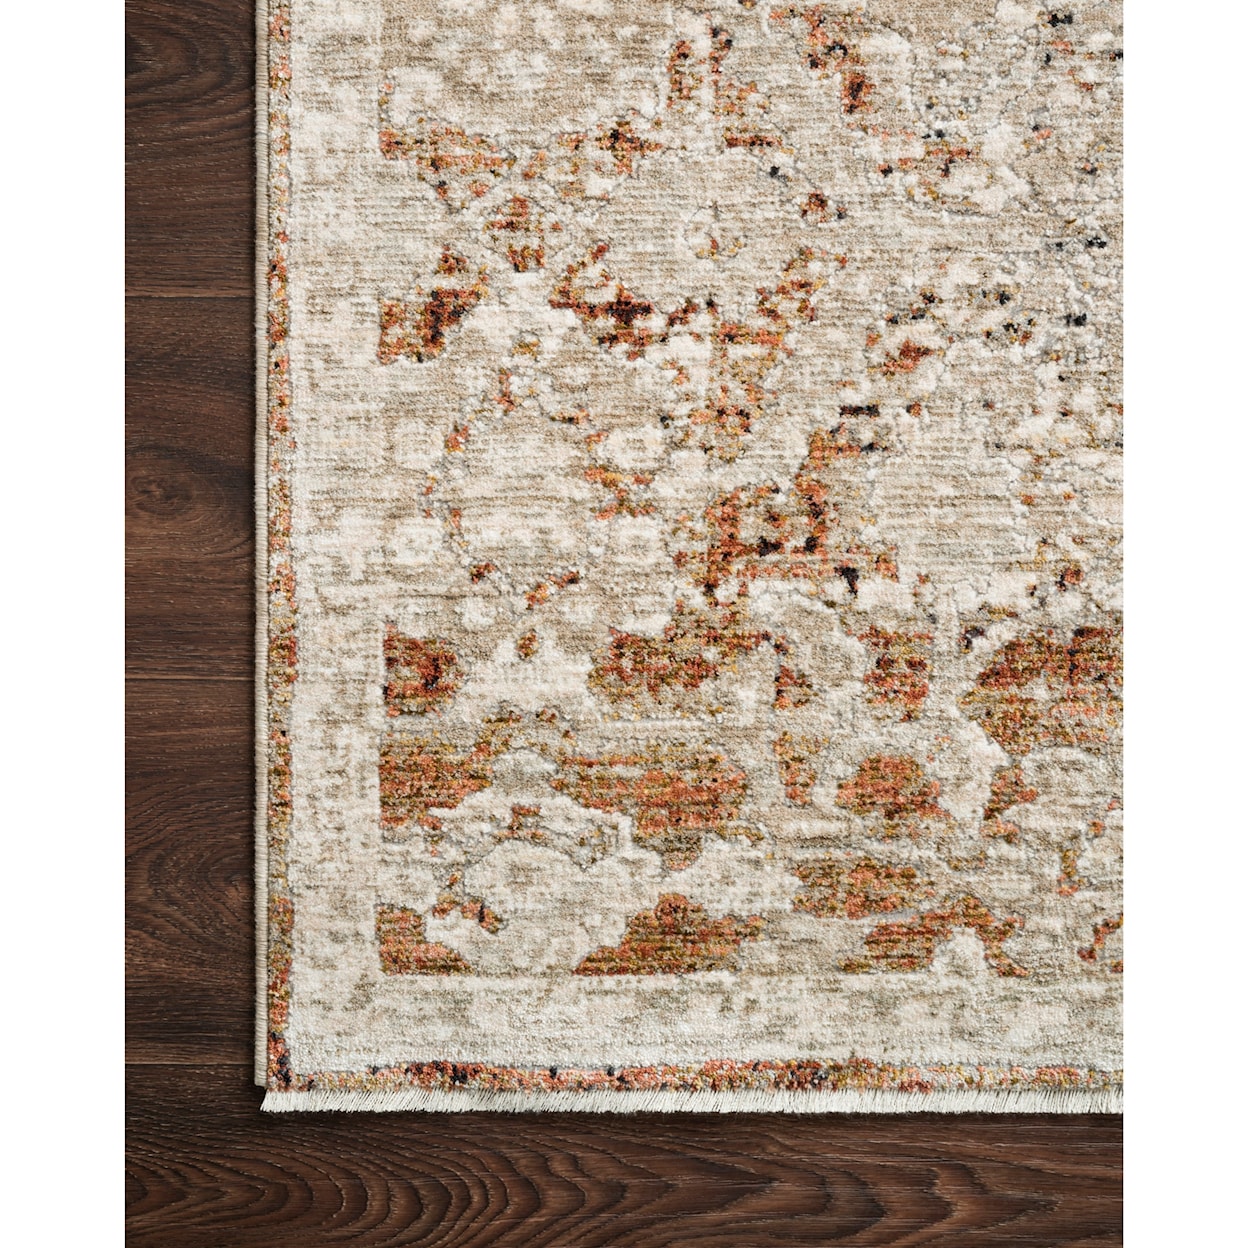 Reeds Rugs Theia 7'10" x 10' Natural / Rust Rug